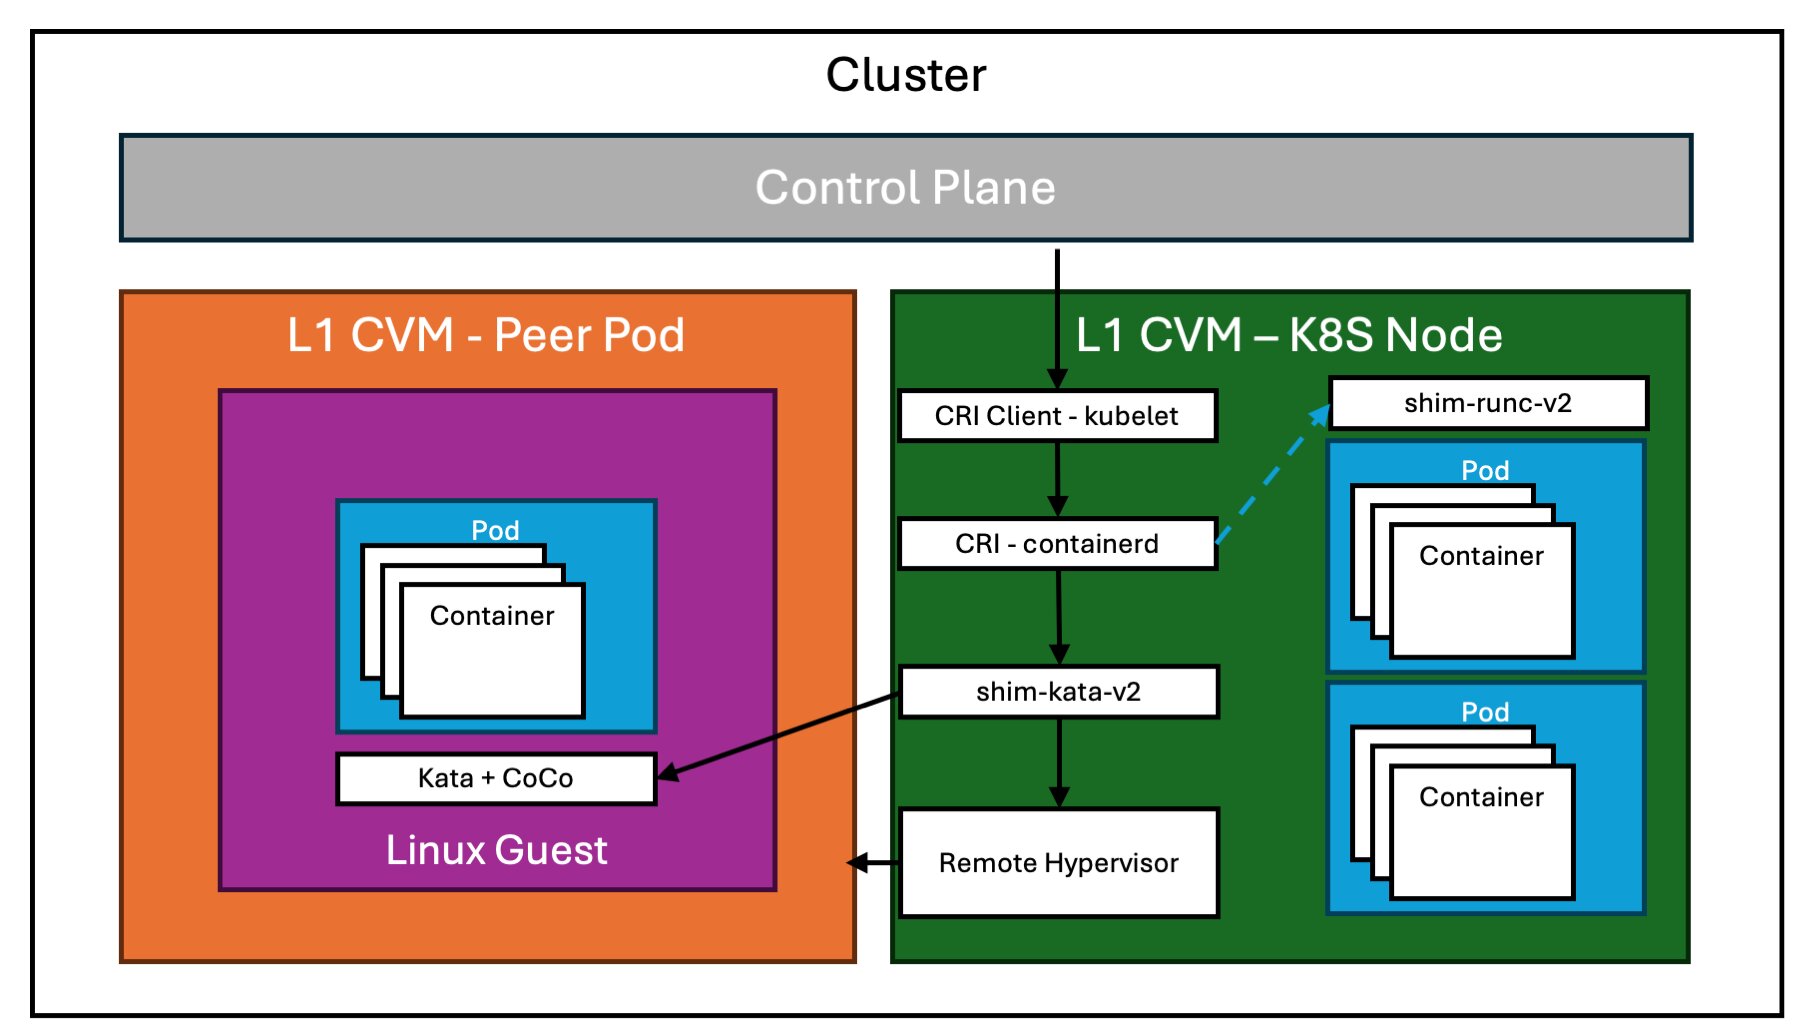 Diagram showing a Kubernetes Control Plane and an agent node. The agent node is a confidential VM receives the instruction to spawn a new pod, but the kata runtime will tell the remote hypervisor, using the cloud API adaptor to provision a new confidential virtual machine in the public cloud environment instead of creating a nested virtual machine. This new confidential VM is tied to the pod’s lifecycle and runs the CoCo software stack.